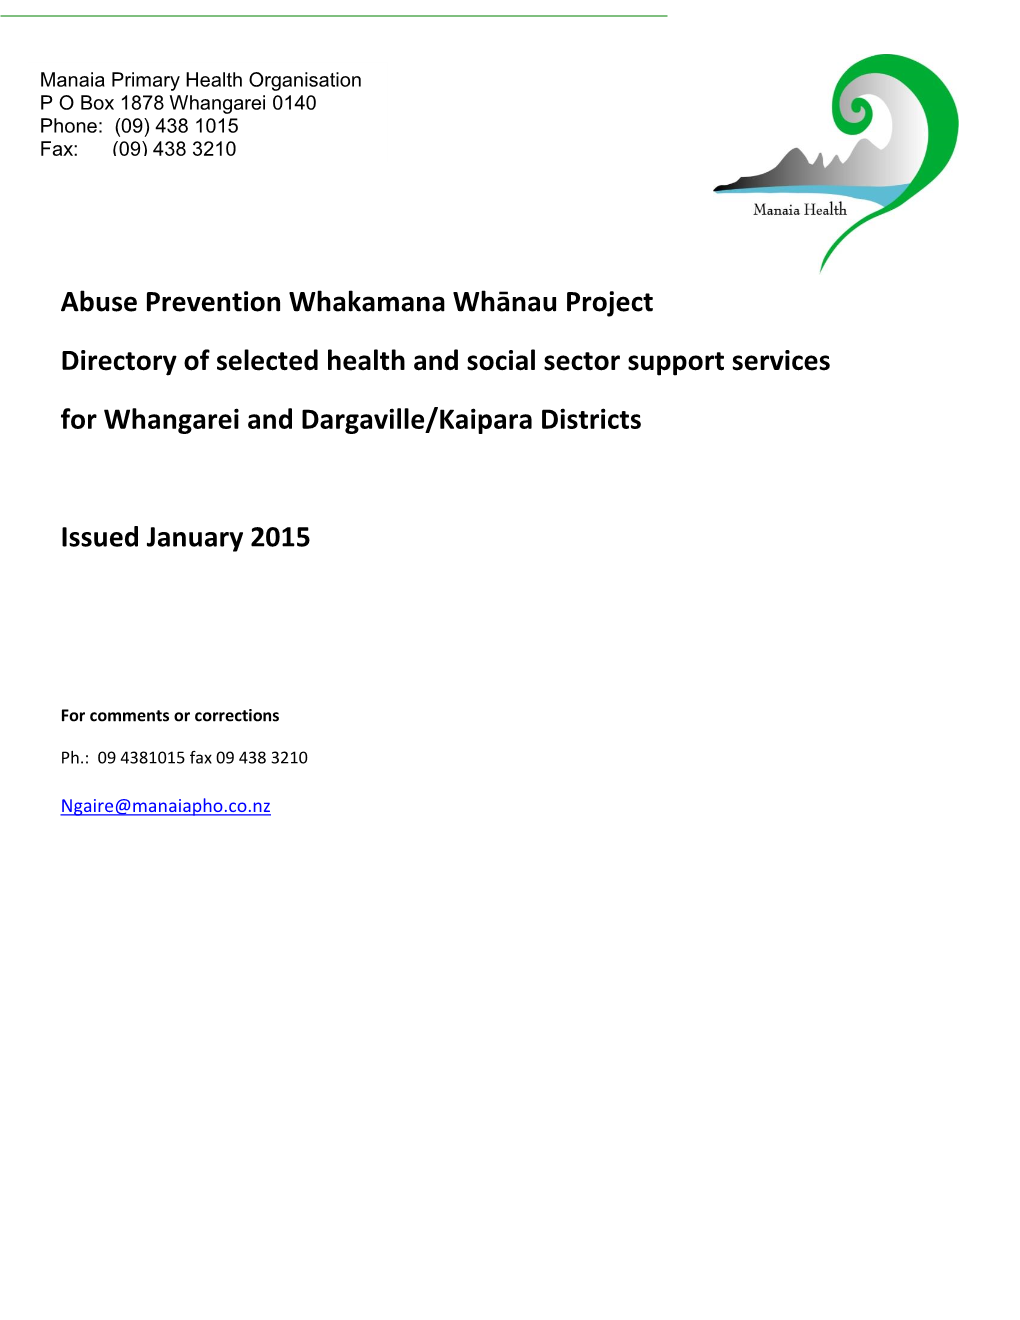 Abuse Prevention Whakamana Whānau Project Directory of Selected Health and Social Sector Support Services for Whangarei and Dargaville/Kaipara Districts